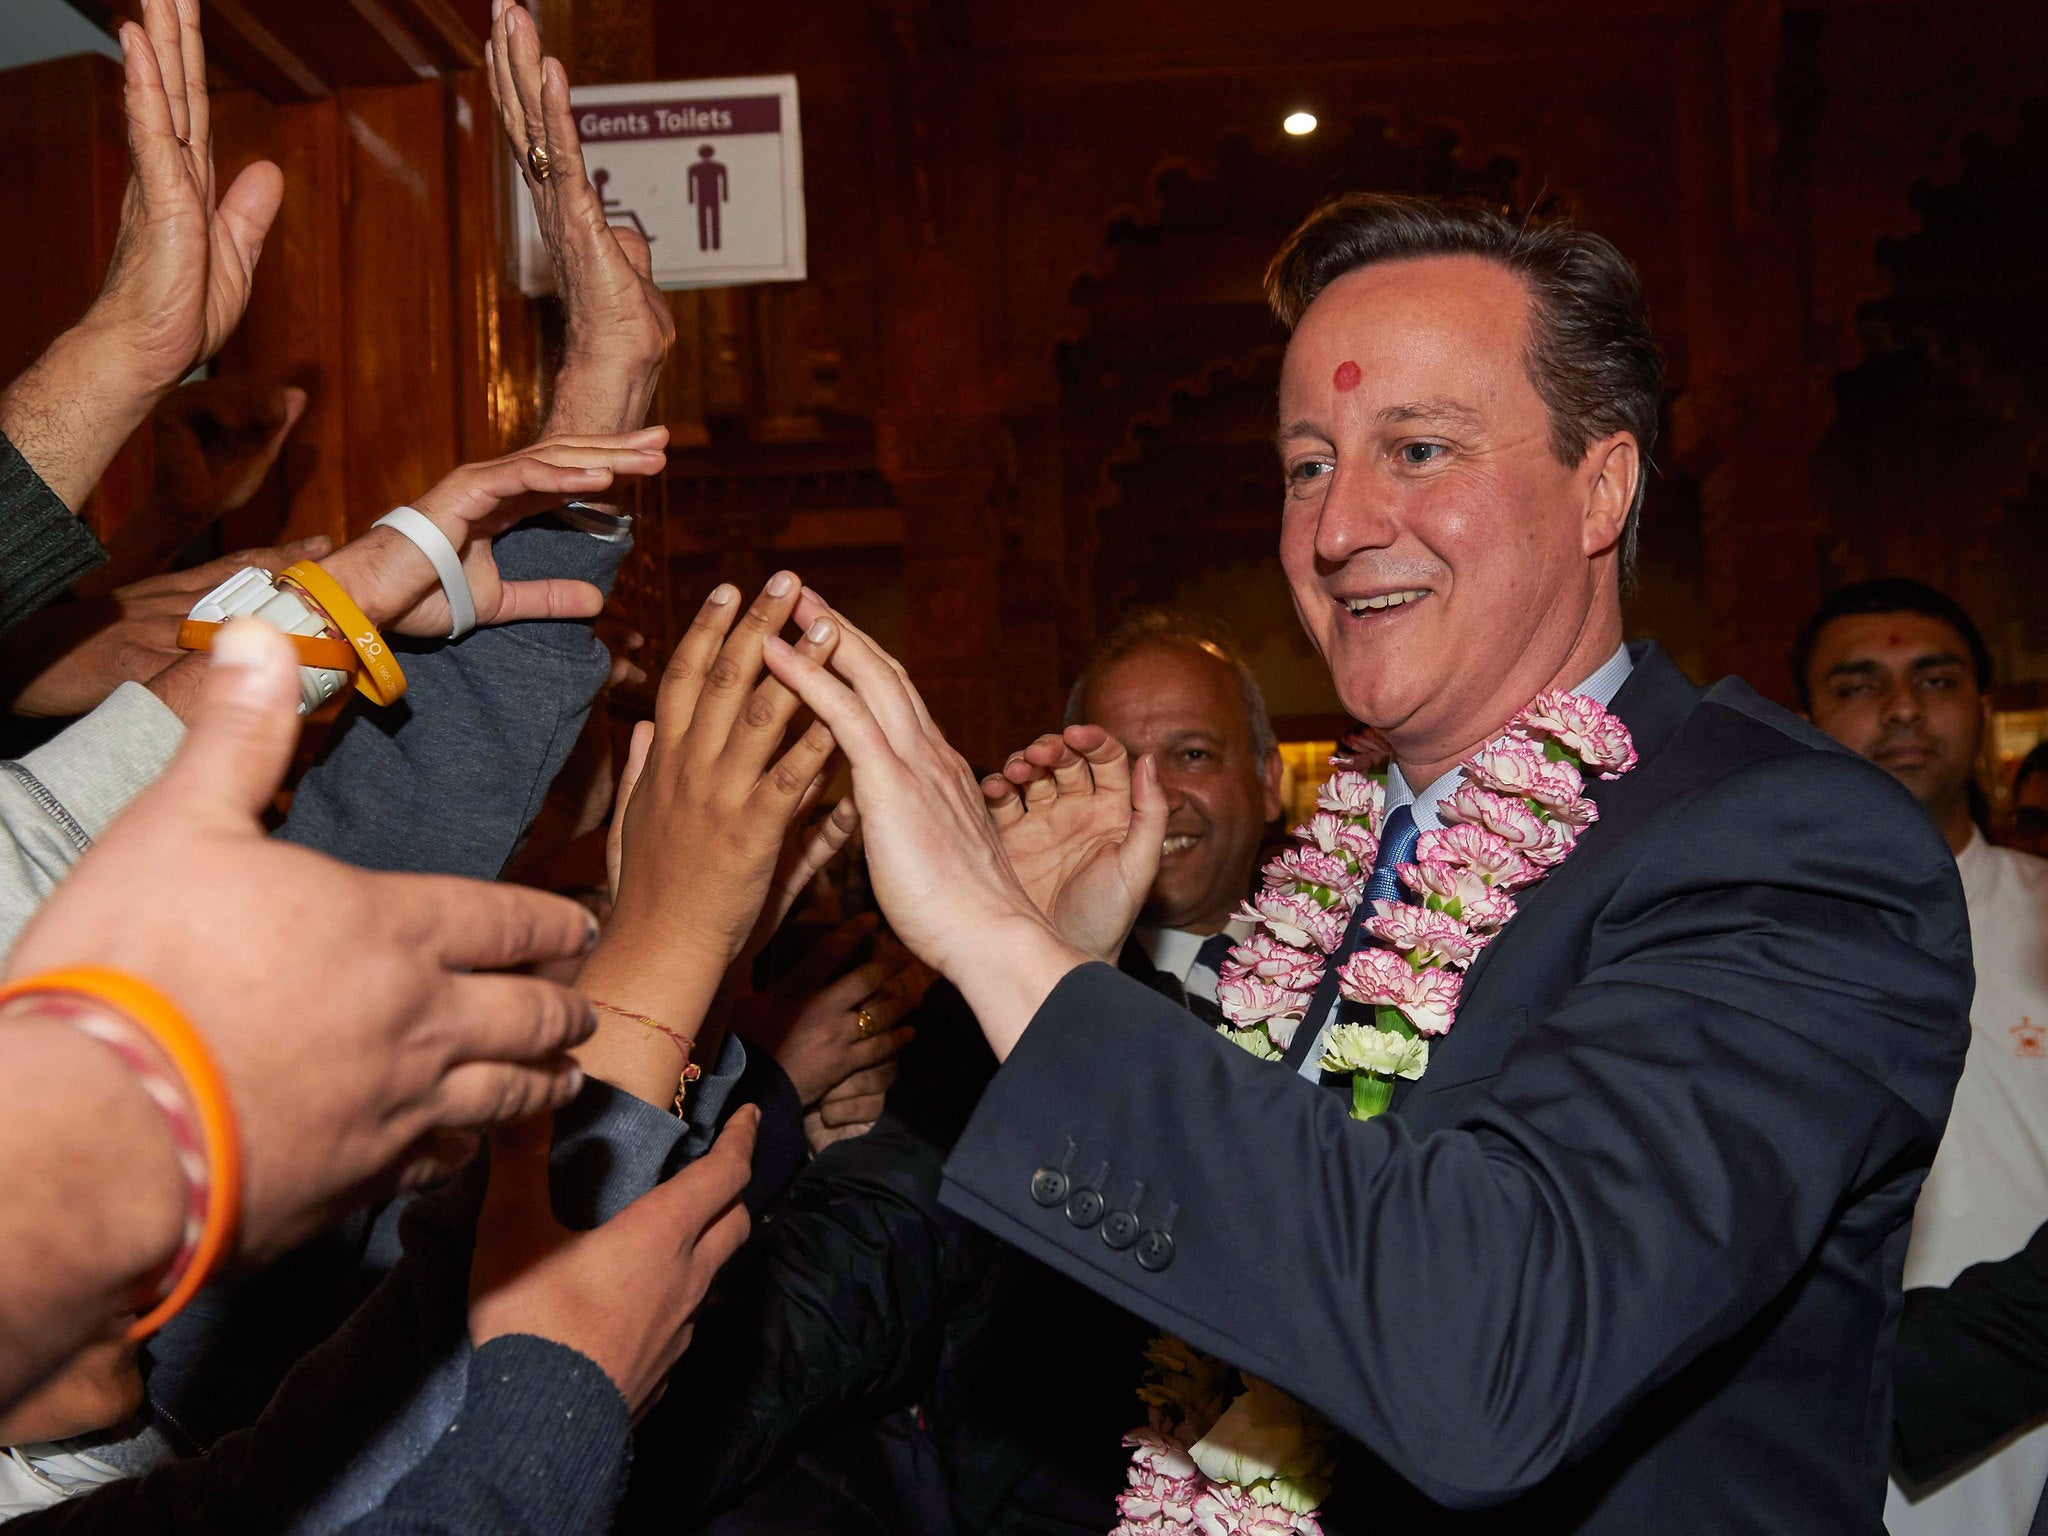 David Cameron vists Neasden Hindu Temple a few days before the election - Hindu voters mostly backed the Conservatives, with 49 percent of them voting Tory, compared to only 41 per cent for Labour.